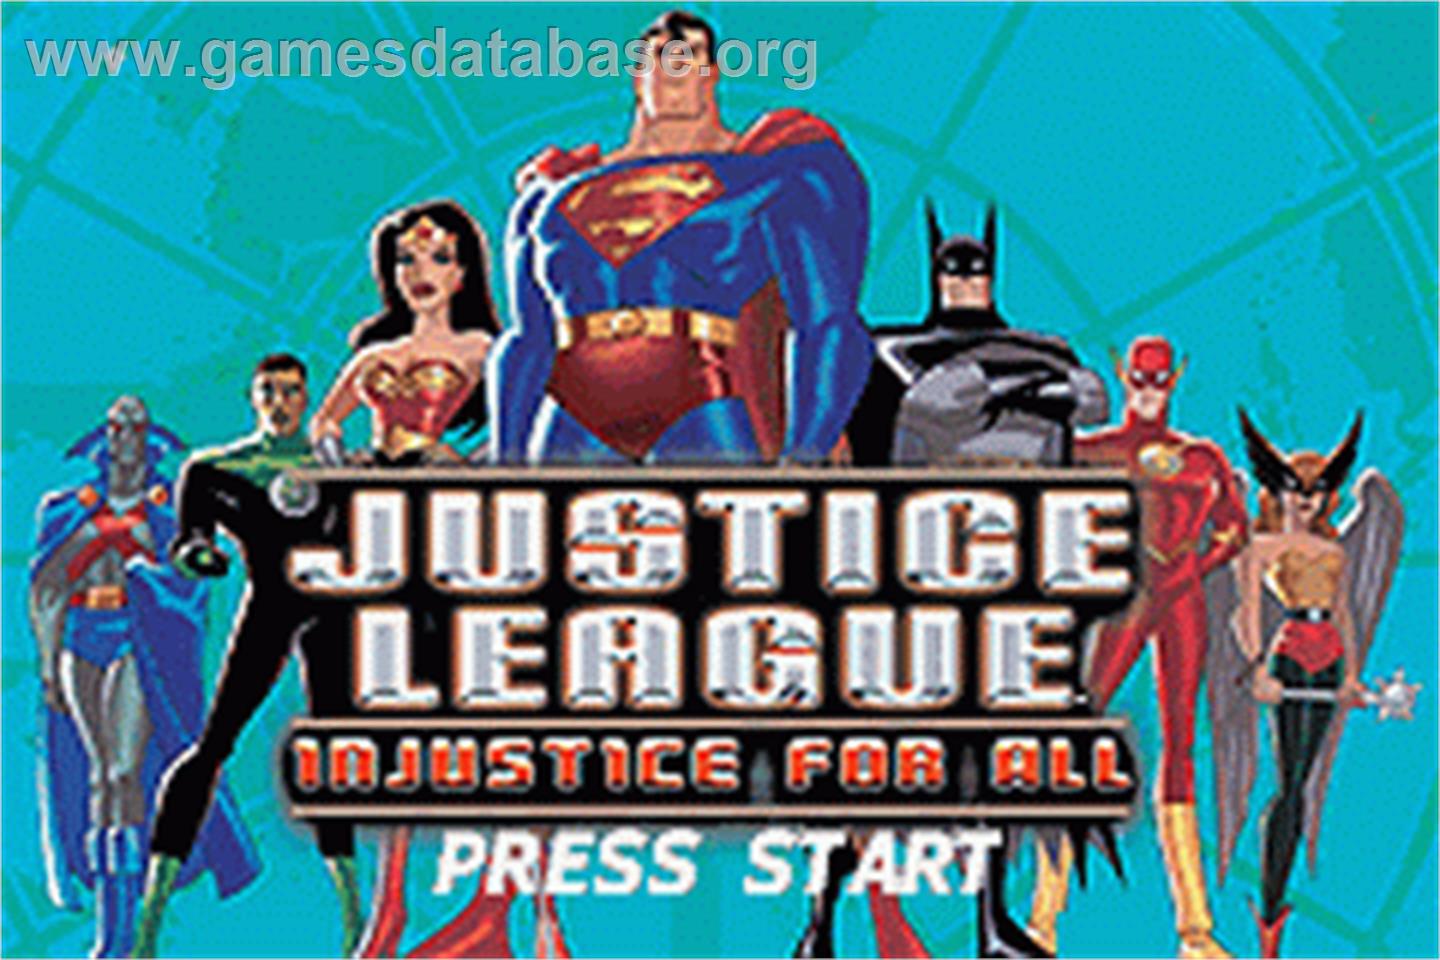 Justice League: Injustice for All - Nintendo Game Boy Advance - Artwork - Title Screen